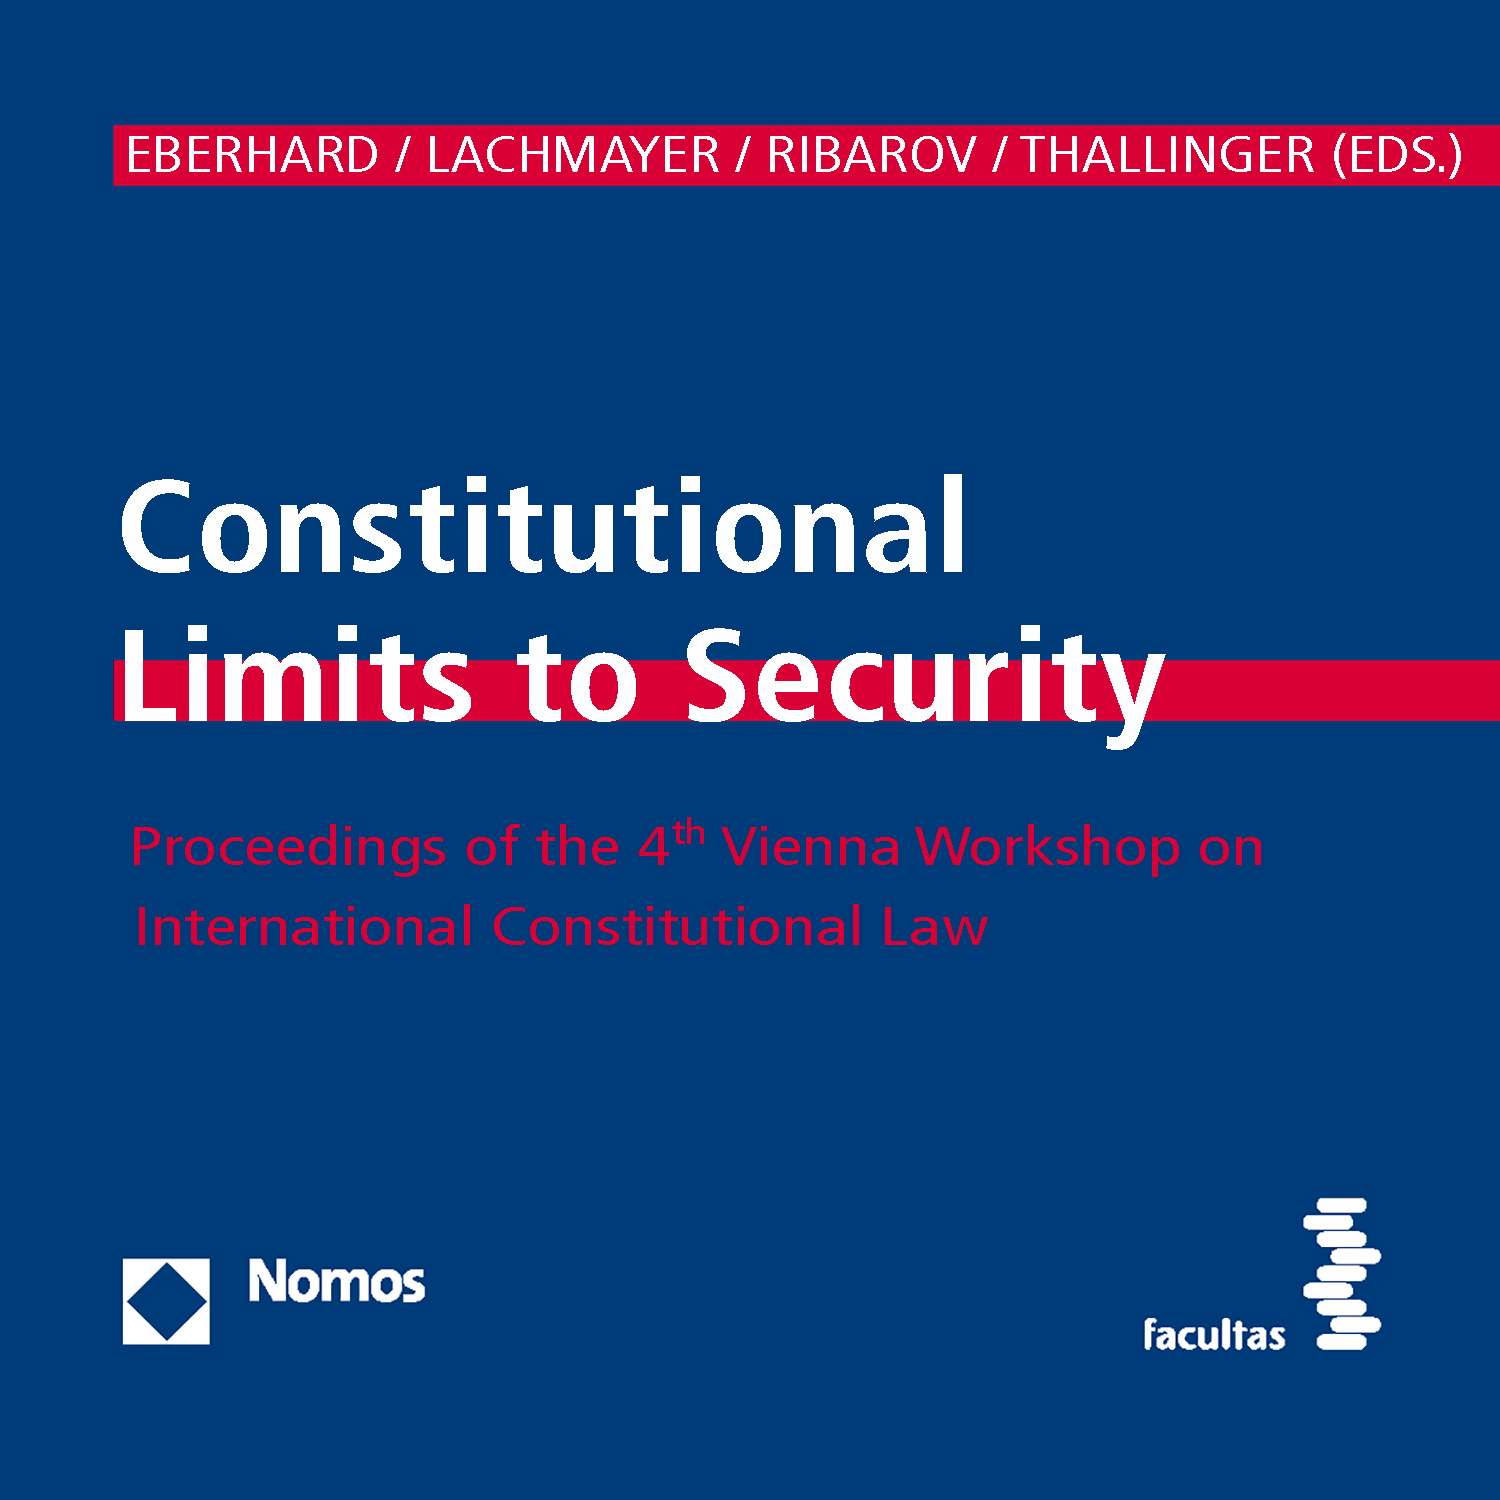 Band 09: Constitutional Limits to Security